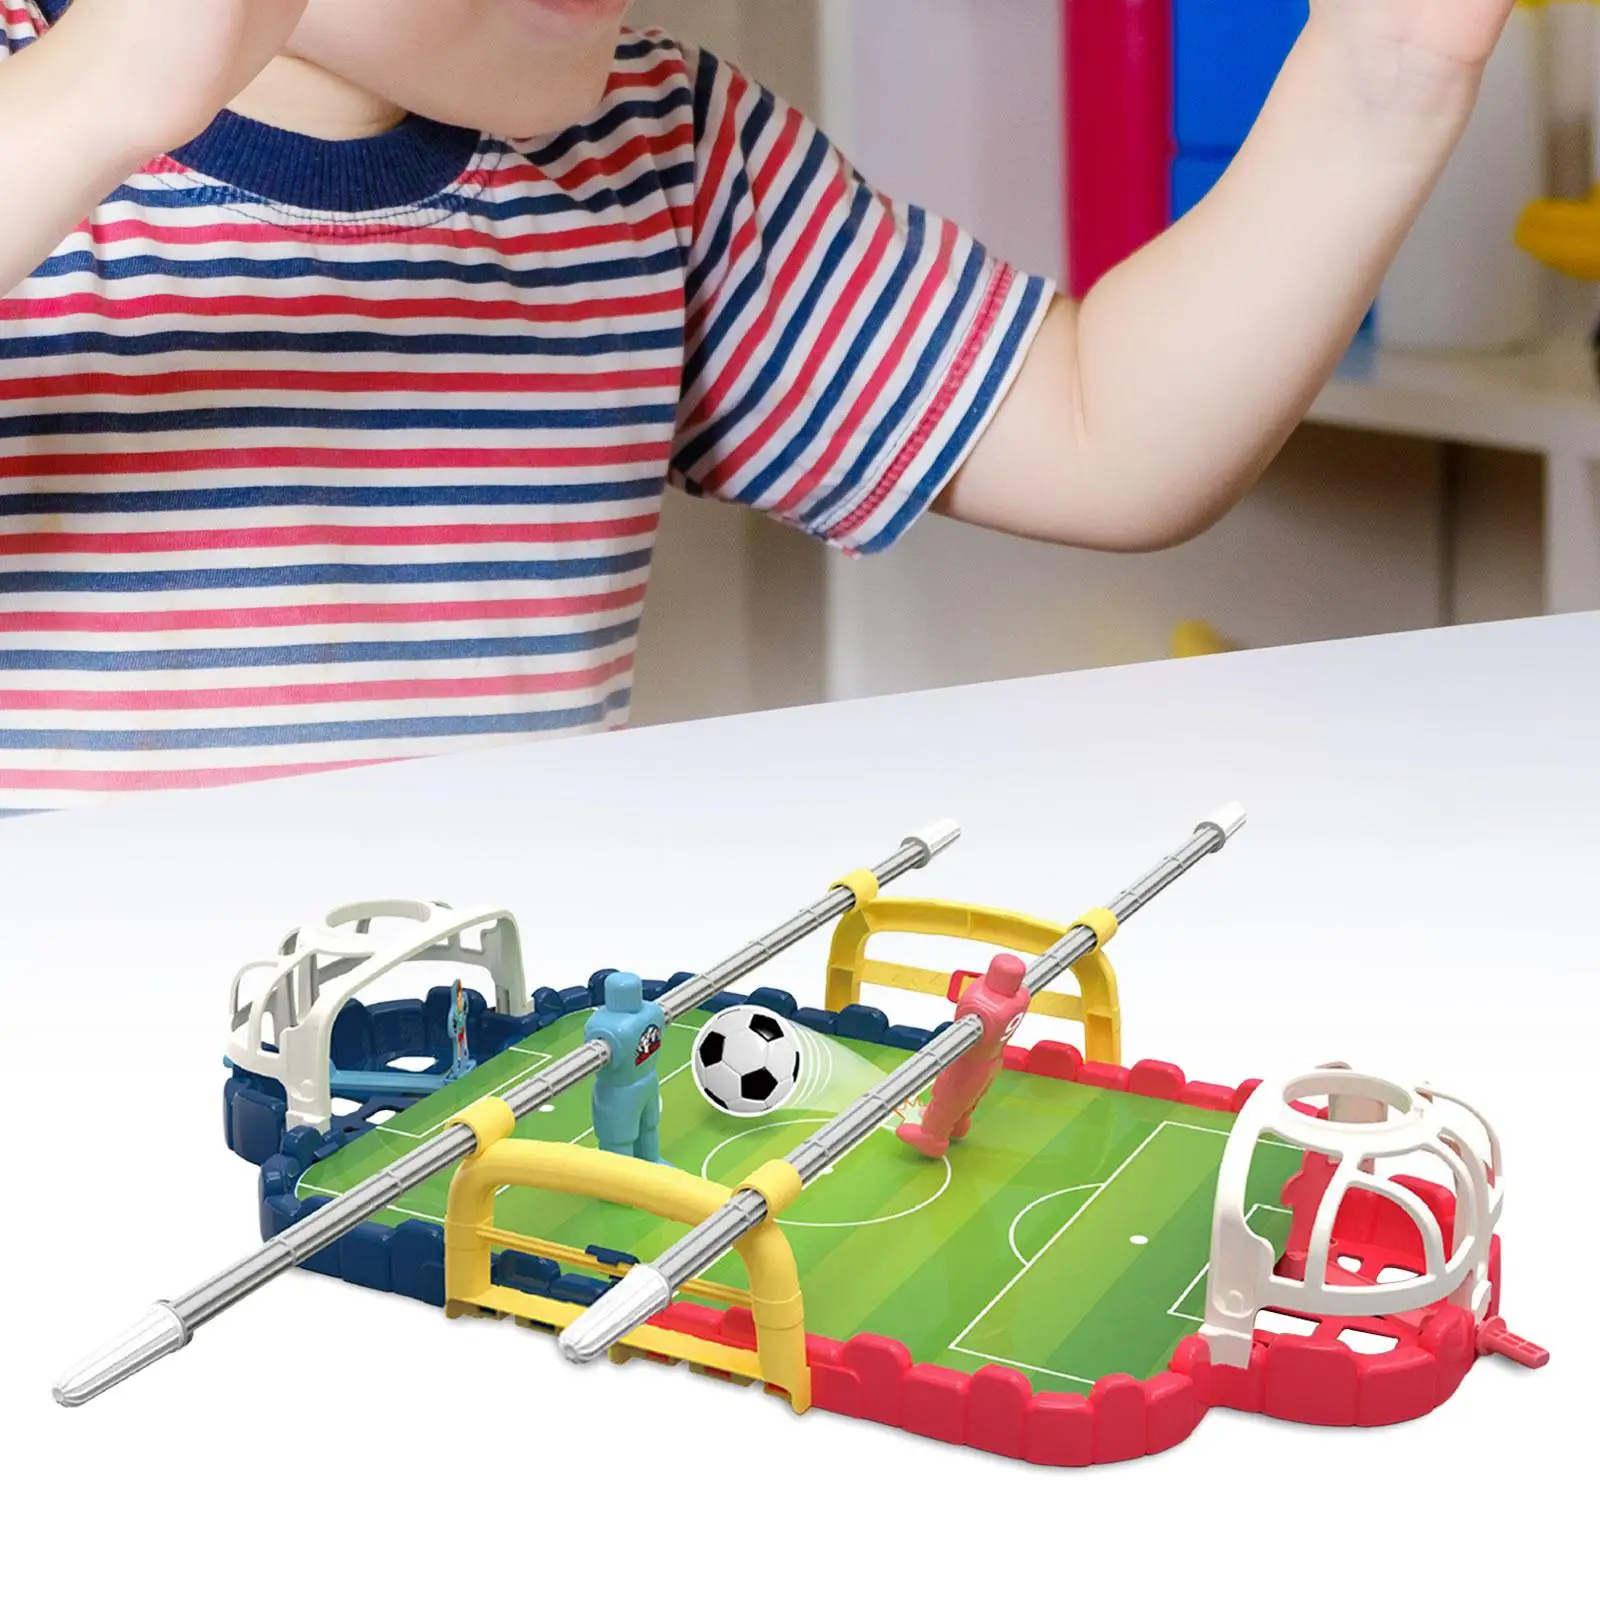 Fun Mini Table Top Basketball Game 2 Player Games Easy to Setup and Score Kids Basketball Toys for Teens 8-12 Age Birthday Gifts